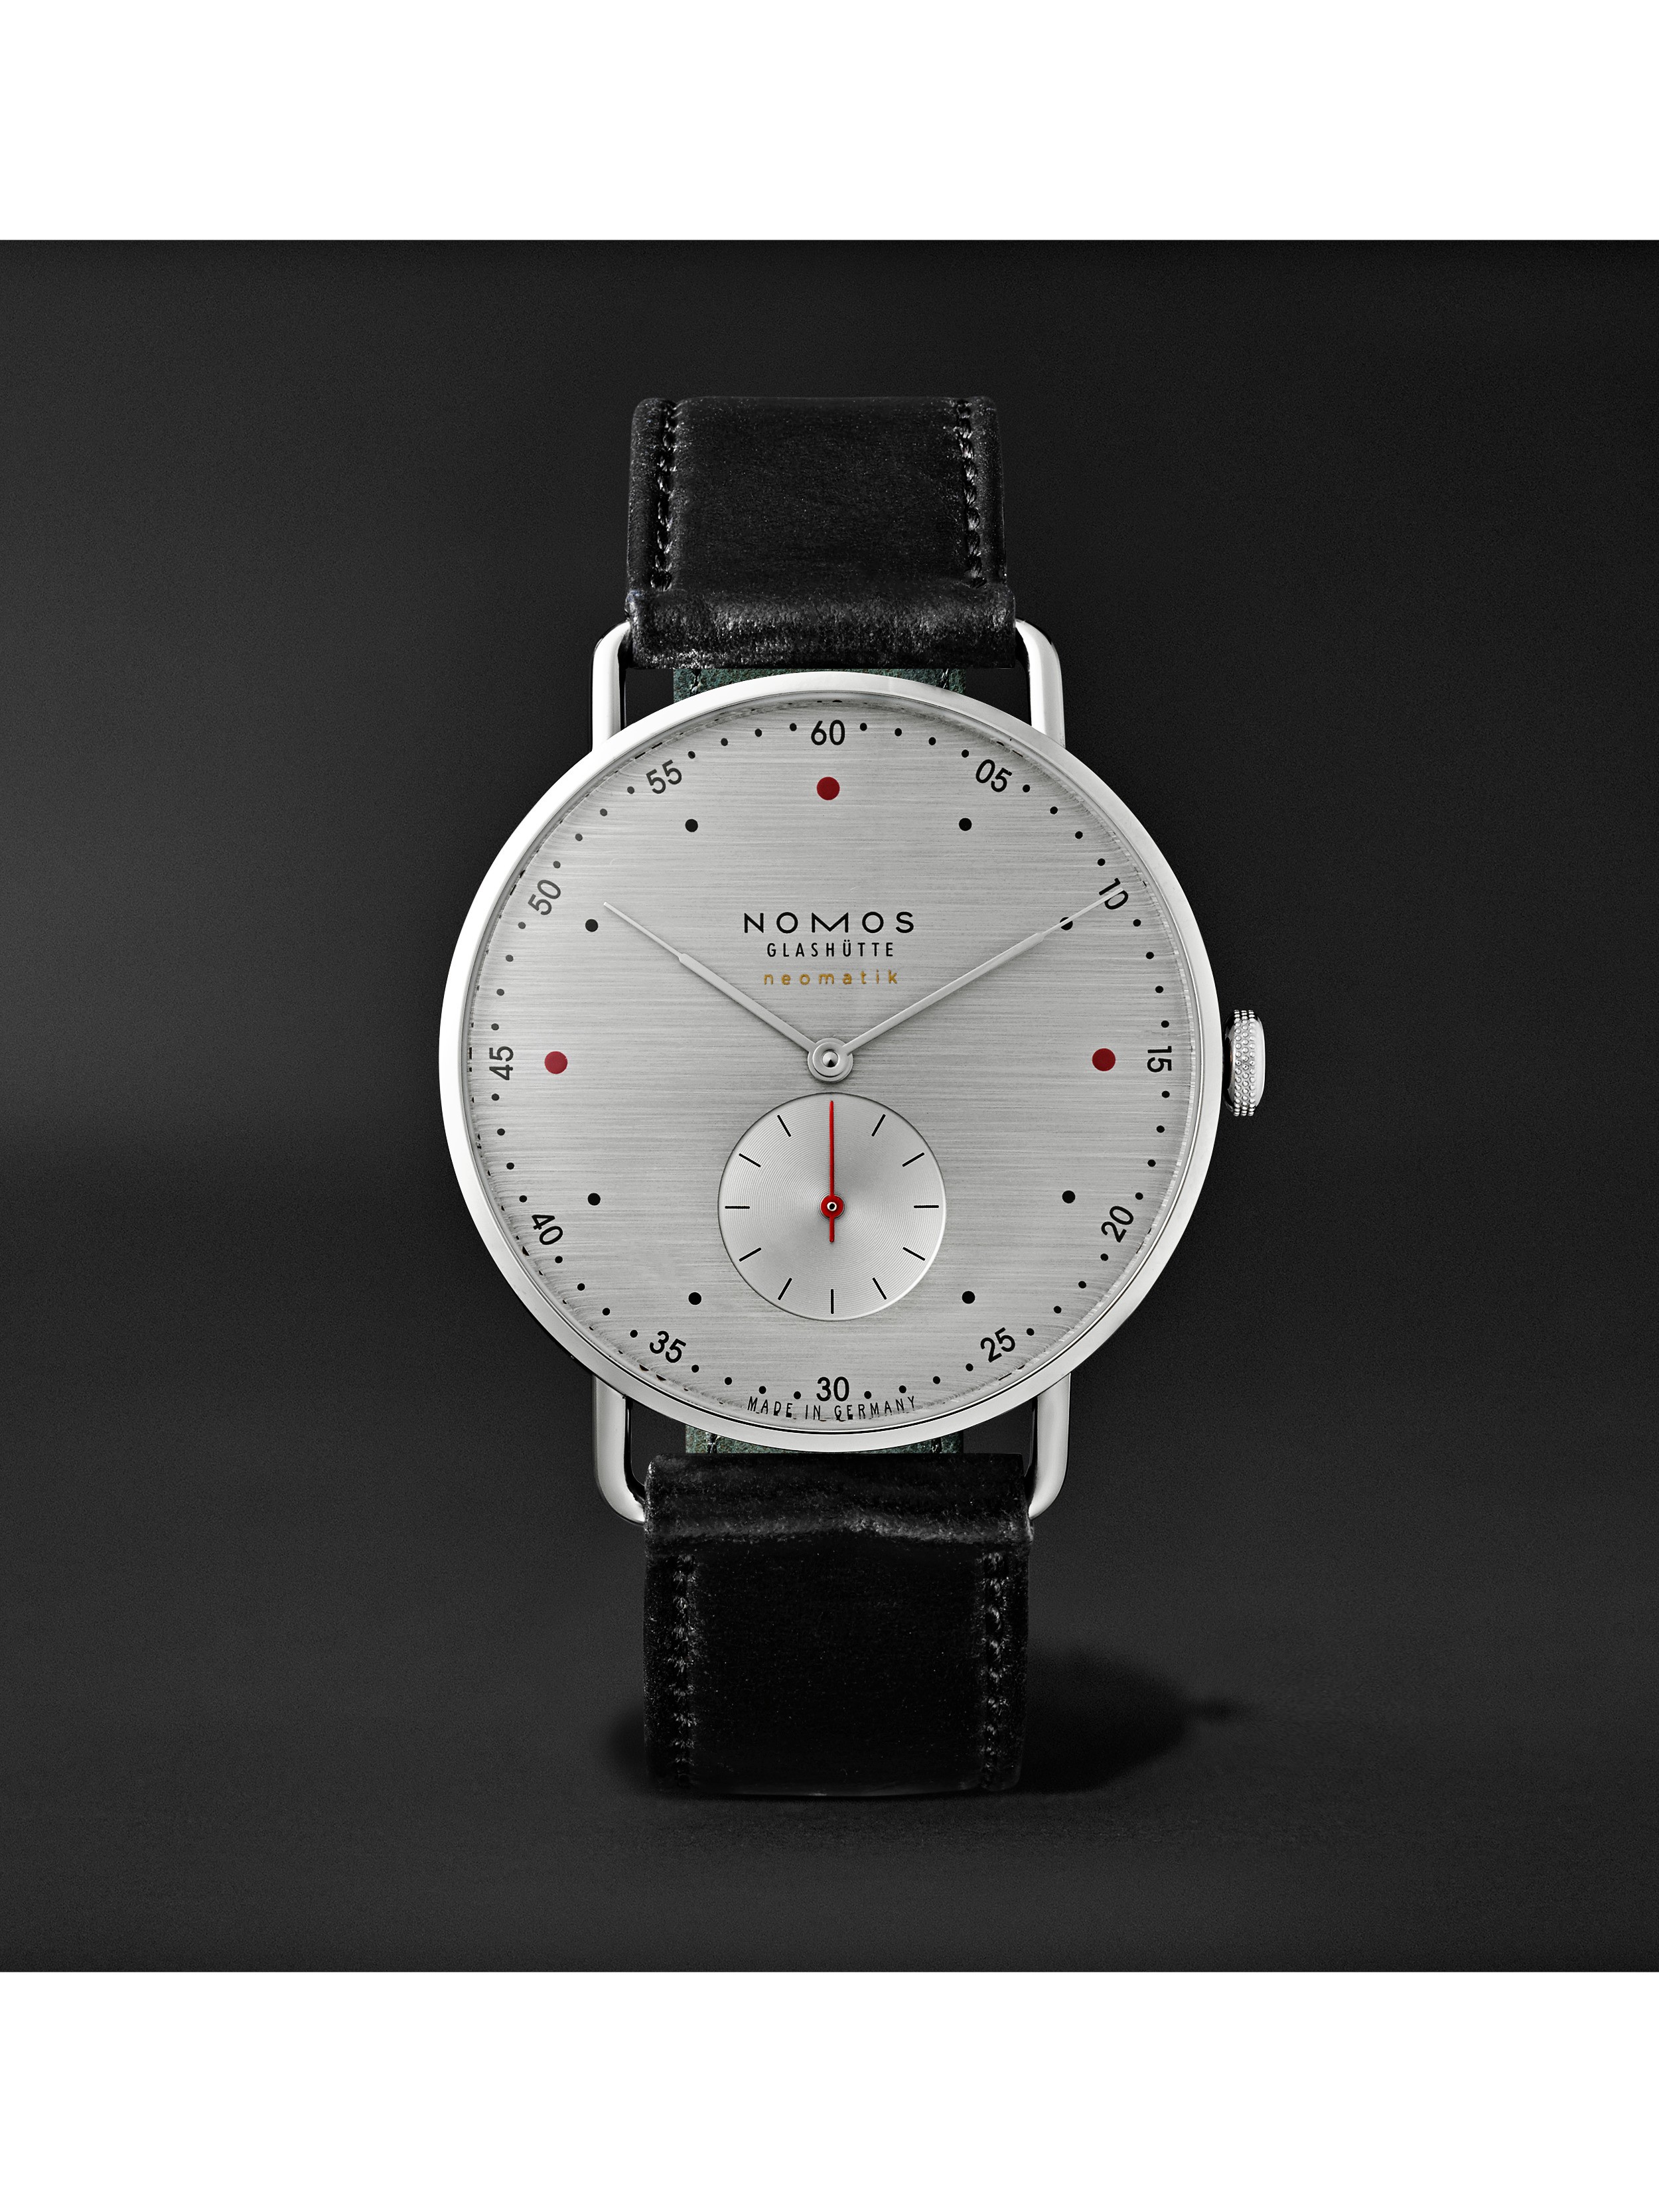 Nomos, Bremont and Habring2 - how our watch columnist fell in love with three under-the-radar brands slowly but surely